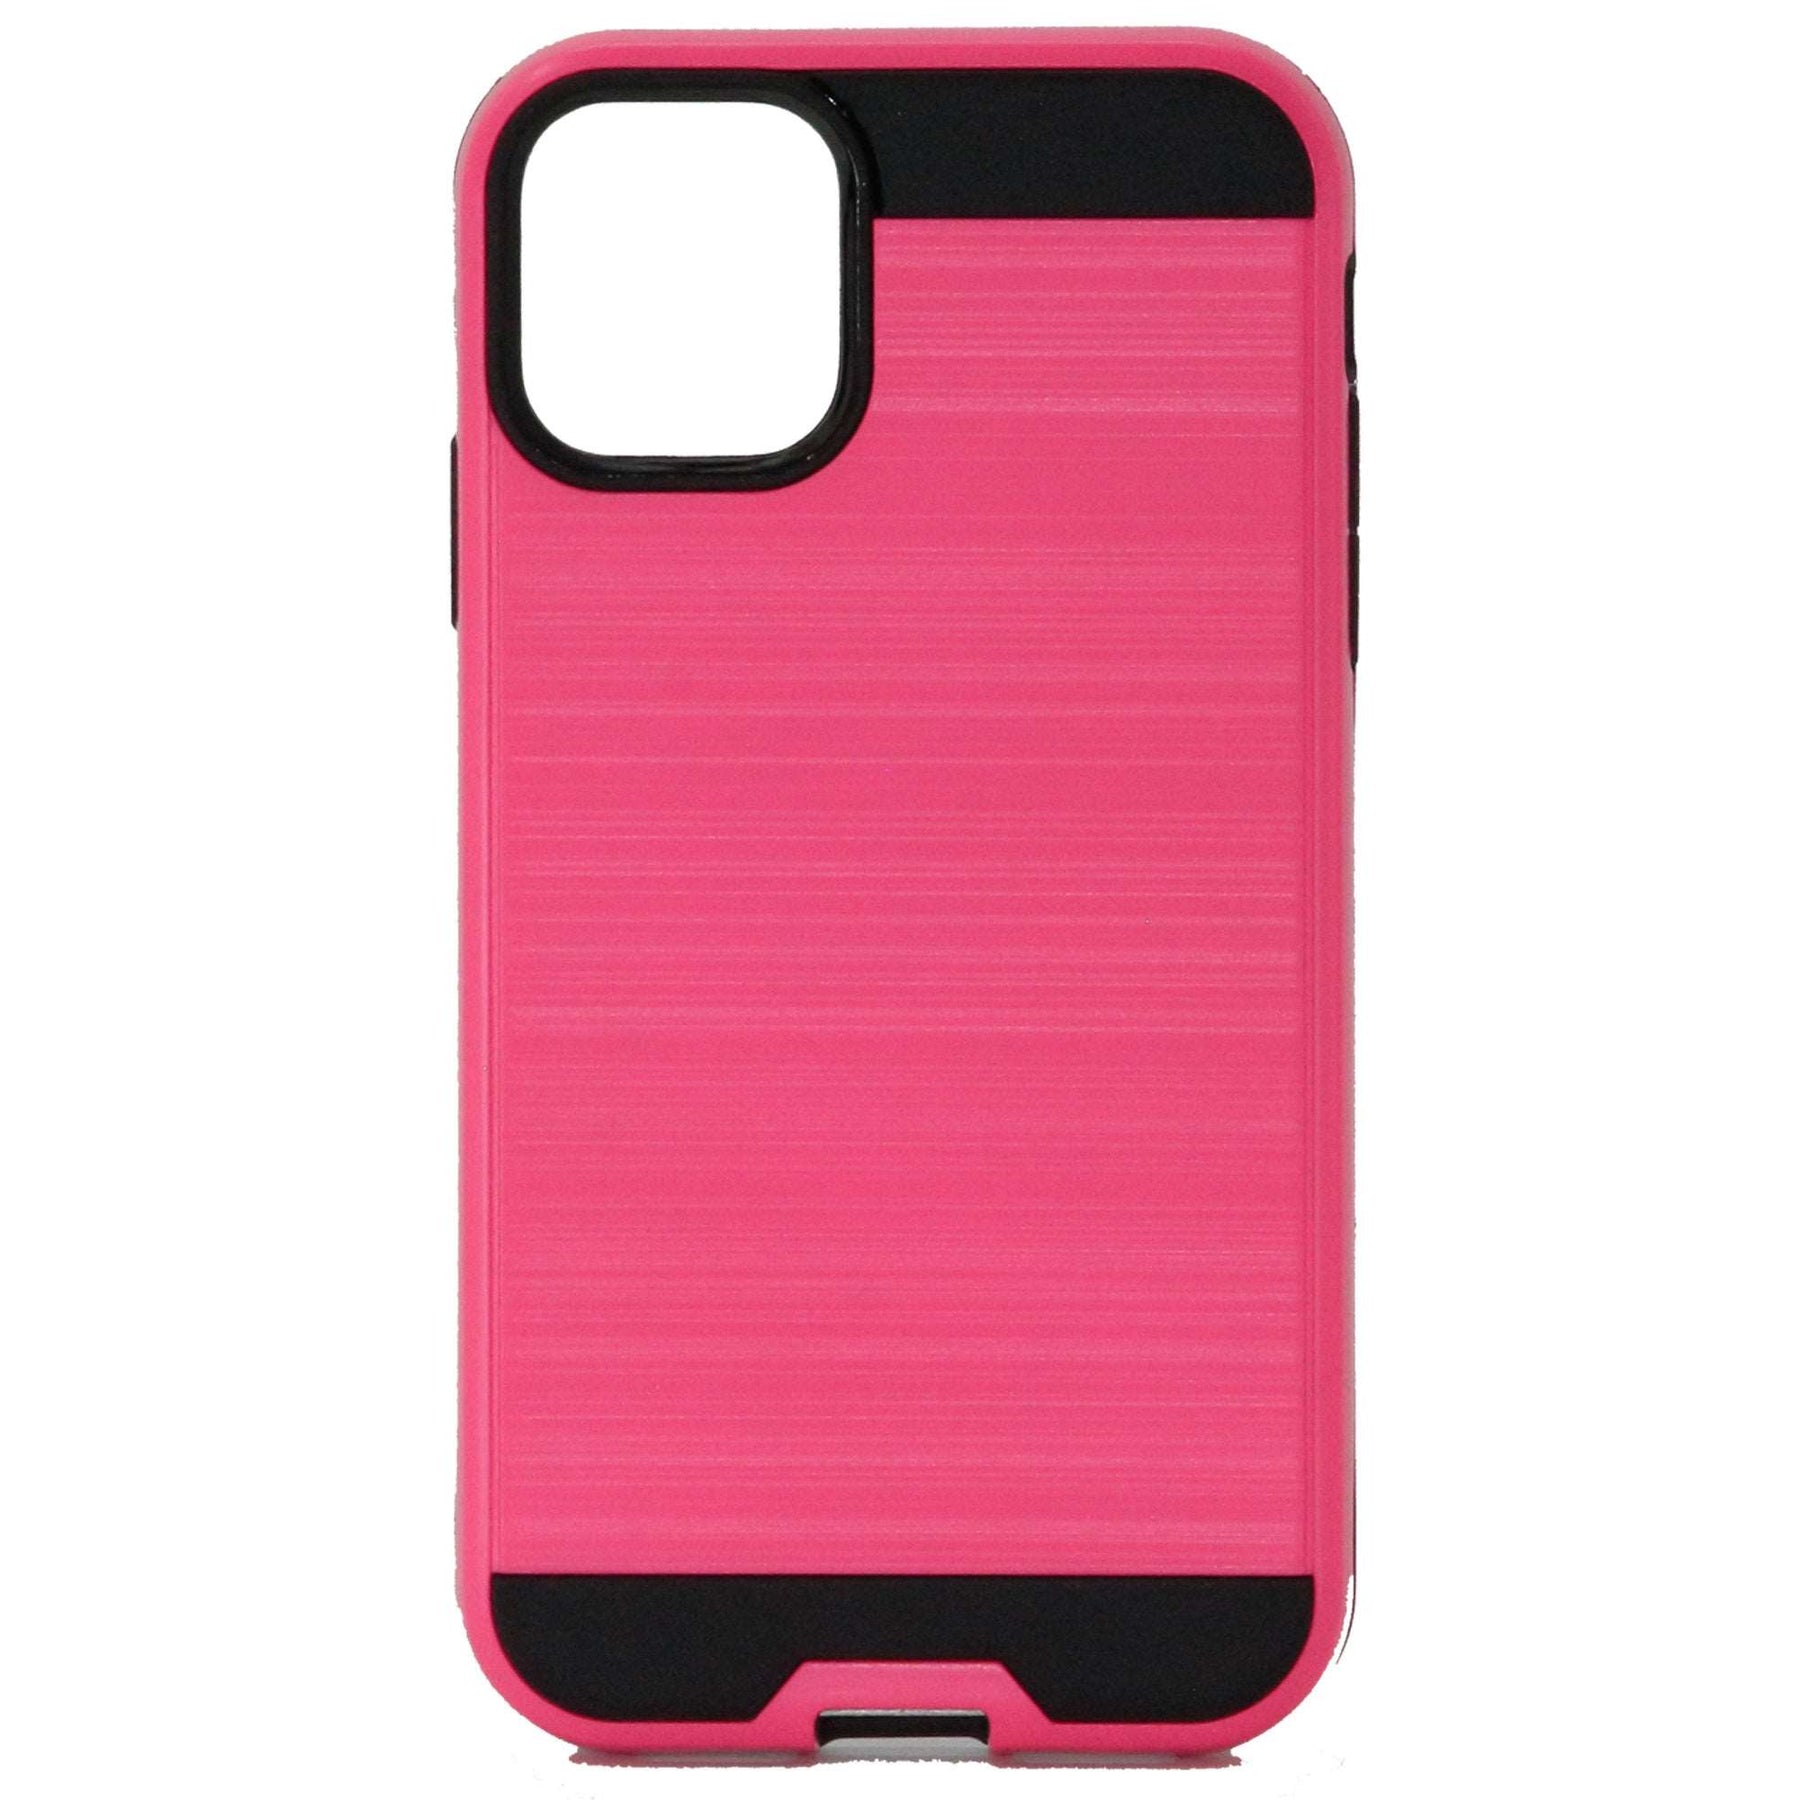 iPhone 12 pink case